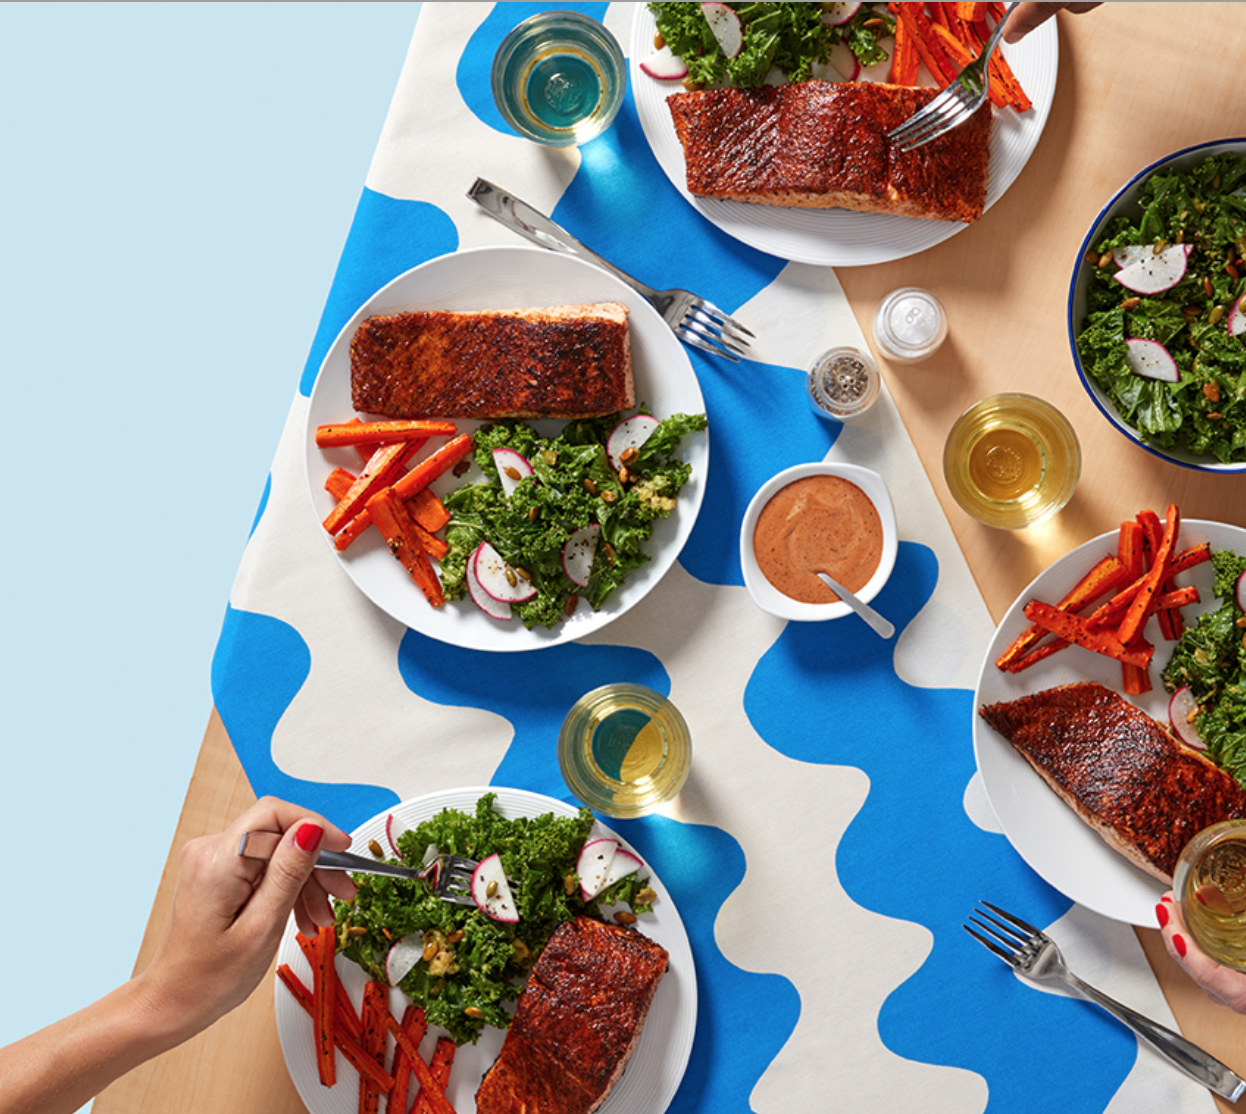 Blue Apron Holiday Deal – Save $100 Off Your First Five Boxes!